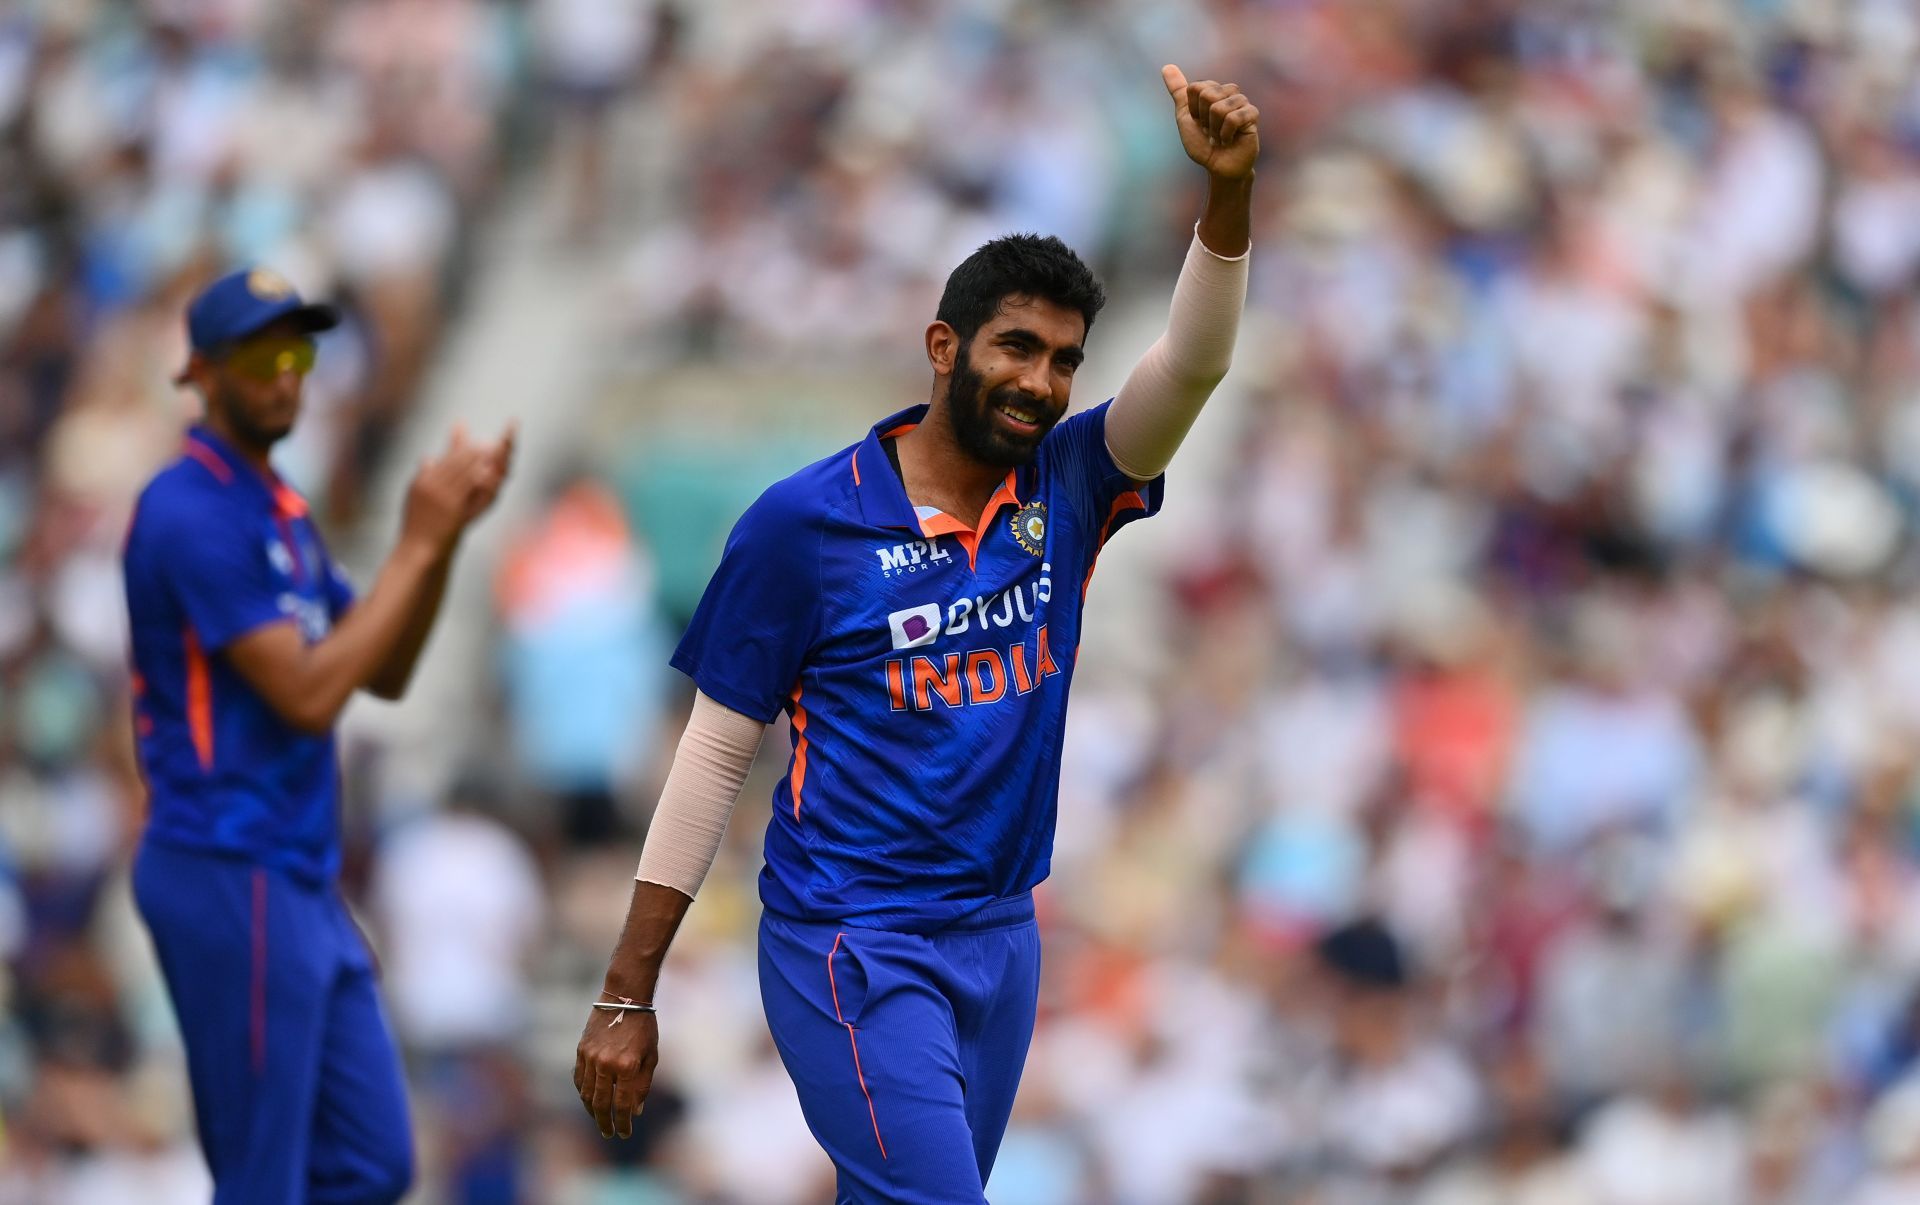 Jasprit Bumrah was virtually unplayable in the first ODI and ended with a deserved six-wicket haul.